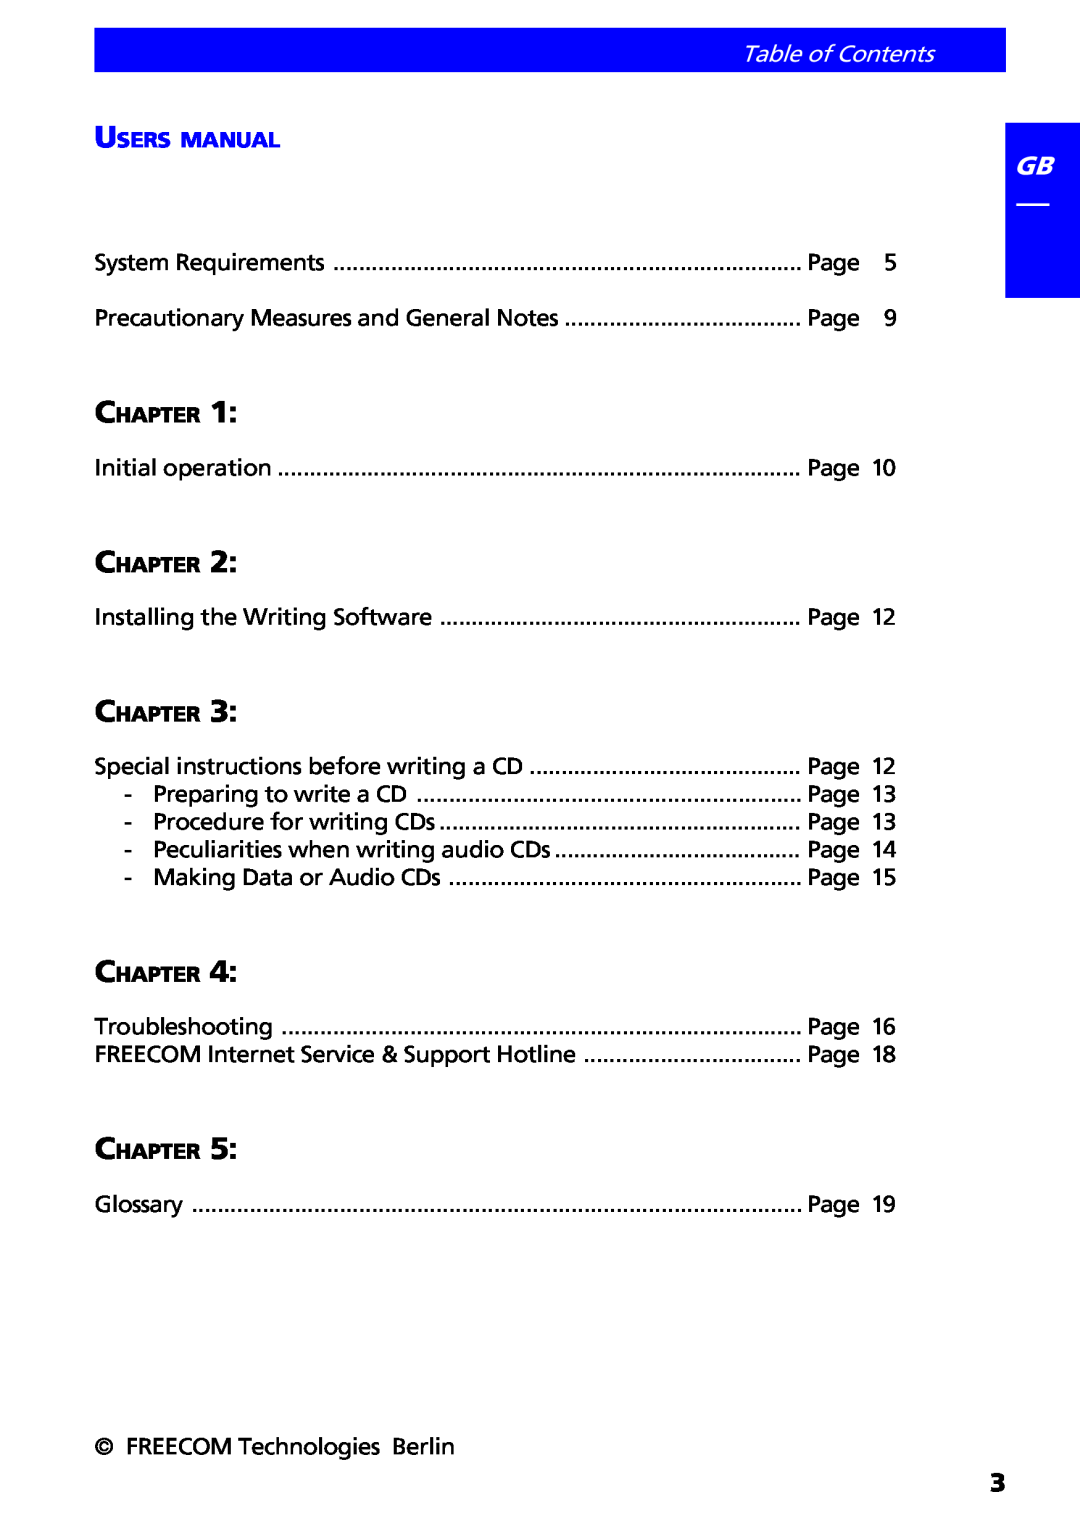 Freecom Technologies II manual Table of Contents 